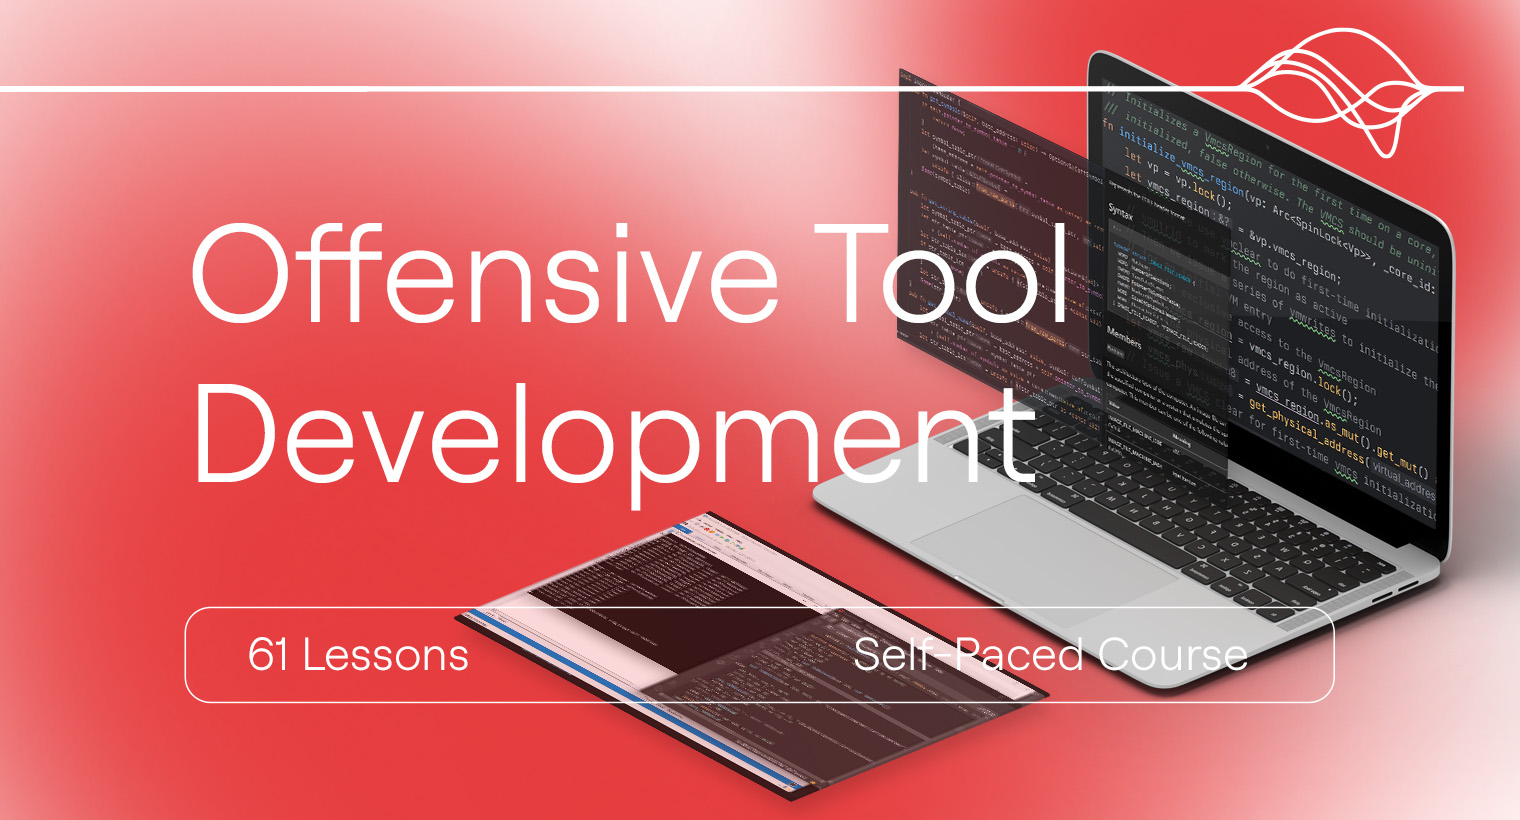 Offensive Tool Development | Signal Labs | Advanced Offensive Cybersecurity Training | Self-Paced Trainings | Live Trainings | Virtual Trainings | Custom Private Trainings for Business